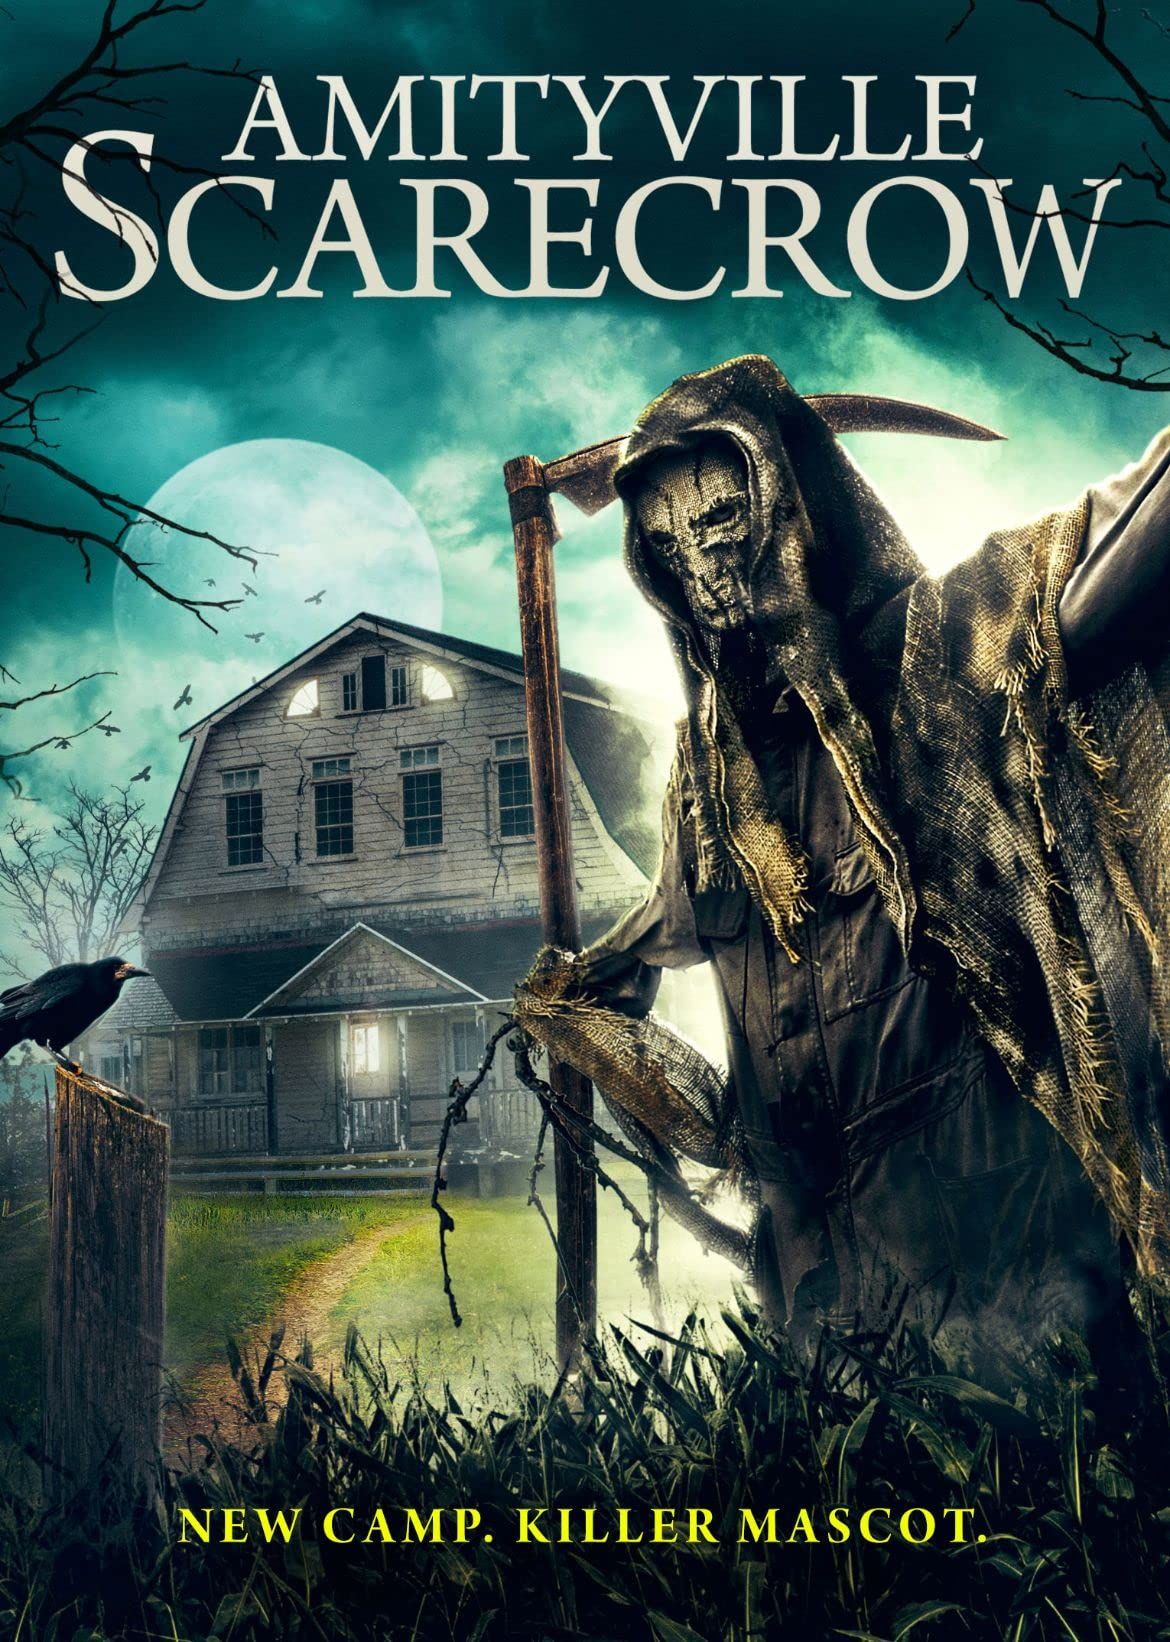 Amityville Scarecrow (2021) Bengali Dubbed (Unofficial) WEBRip download full movie